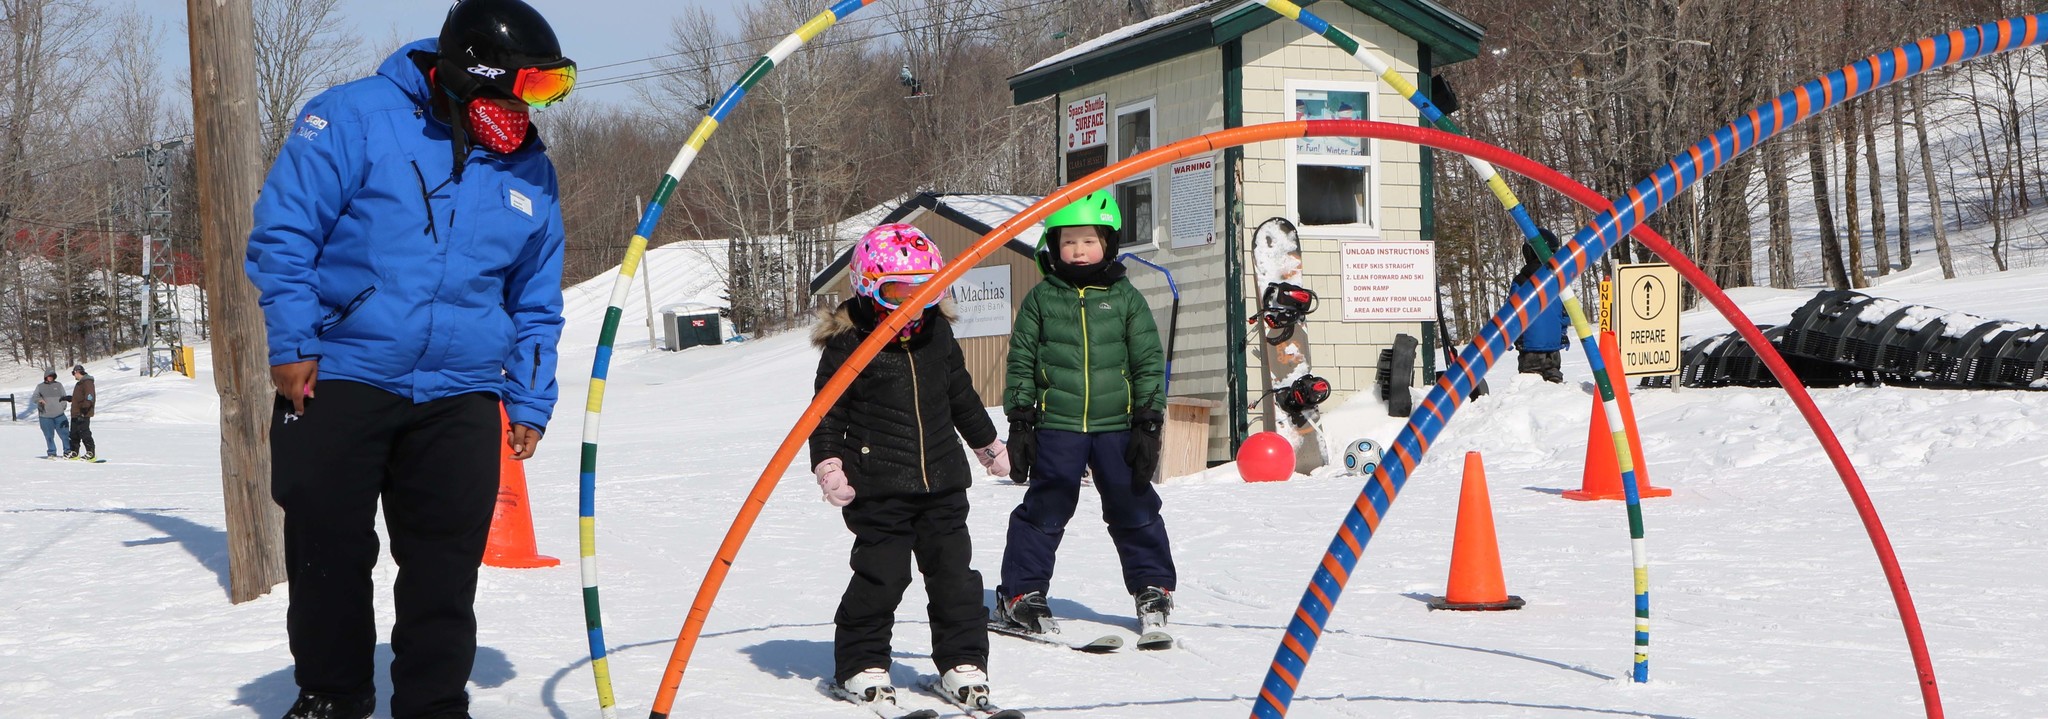 Learning to ski 